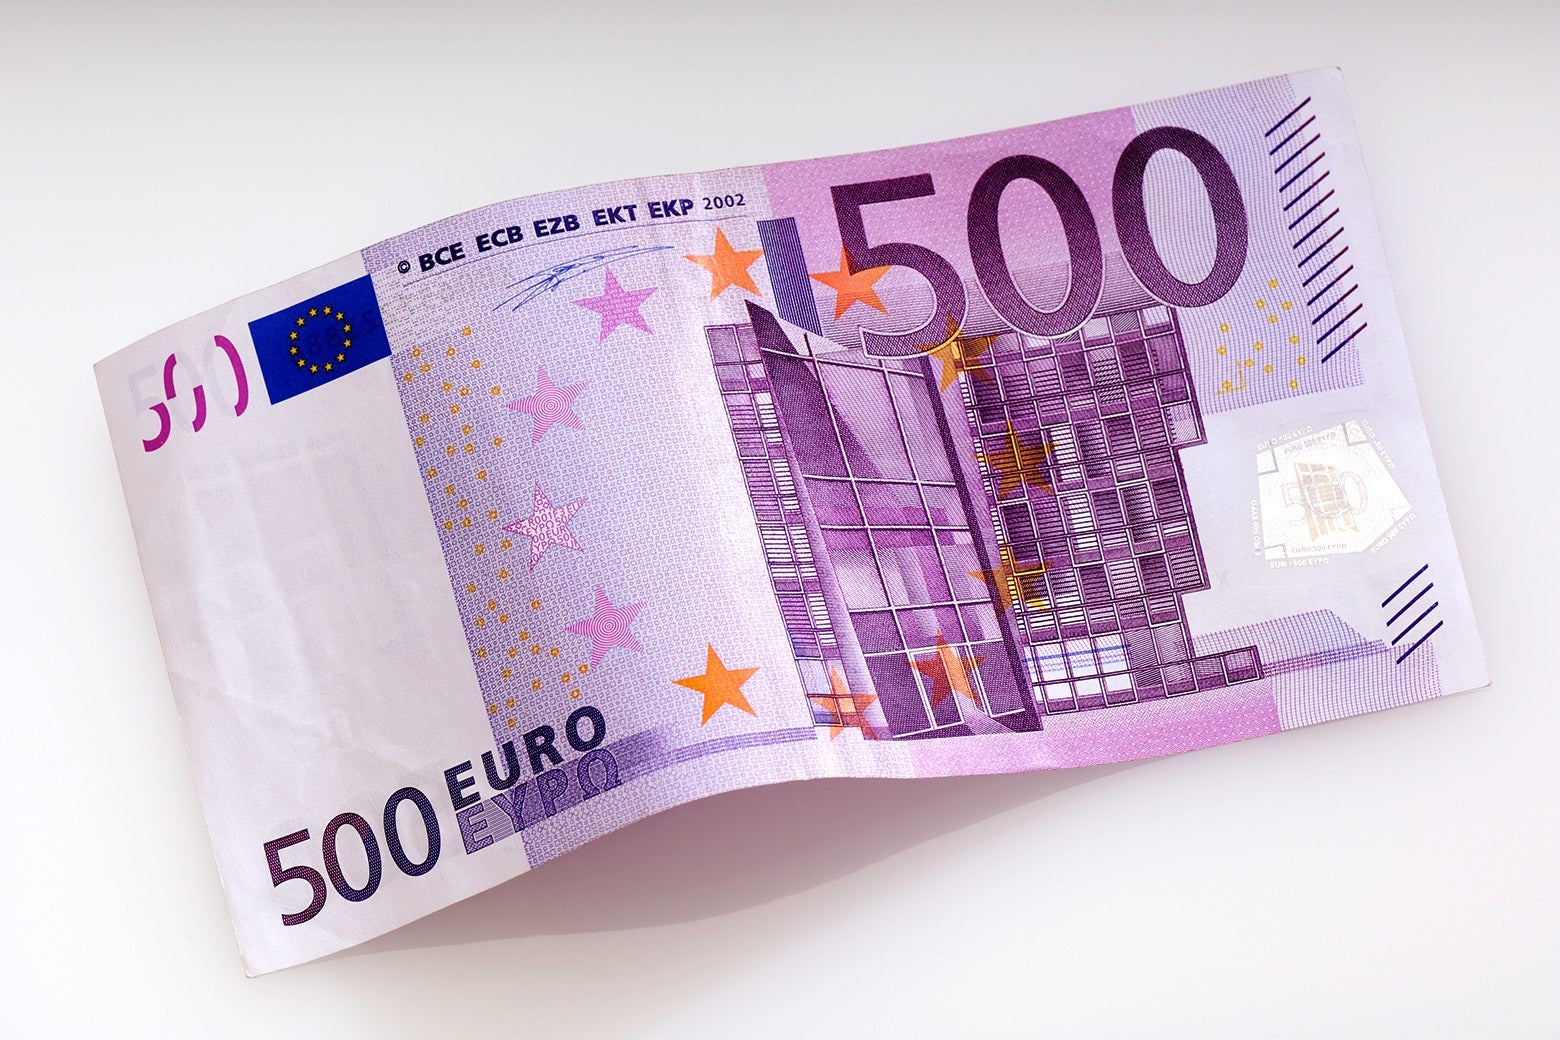 The EU finally got rid of the 500 euro bill, the currency of